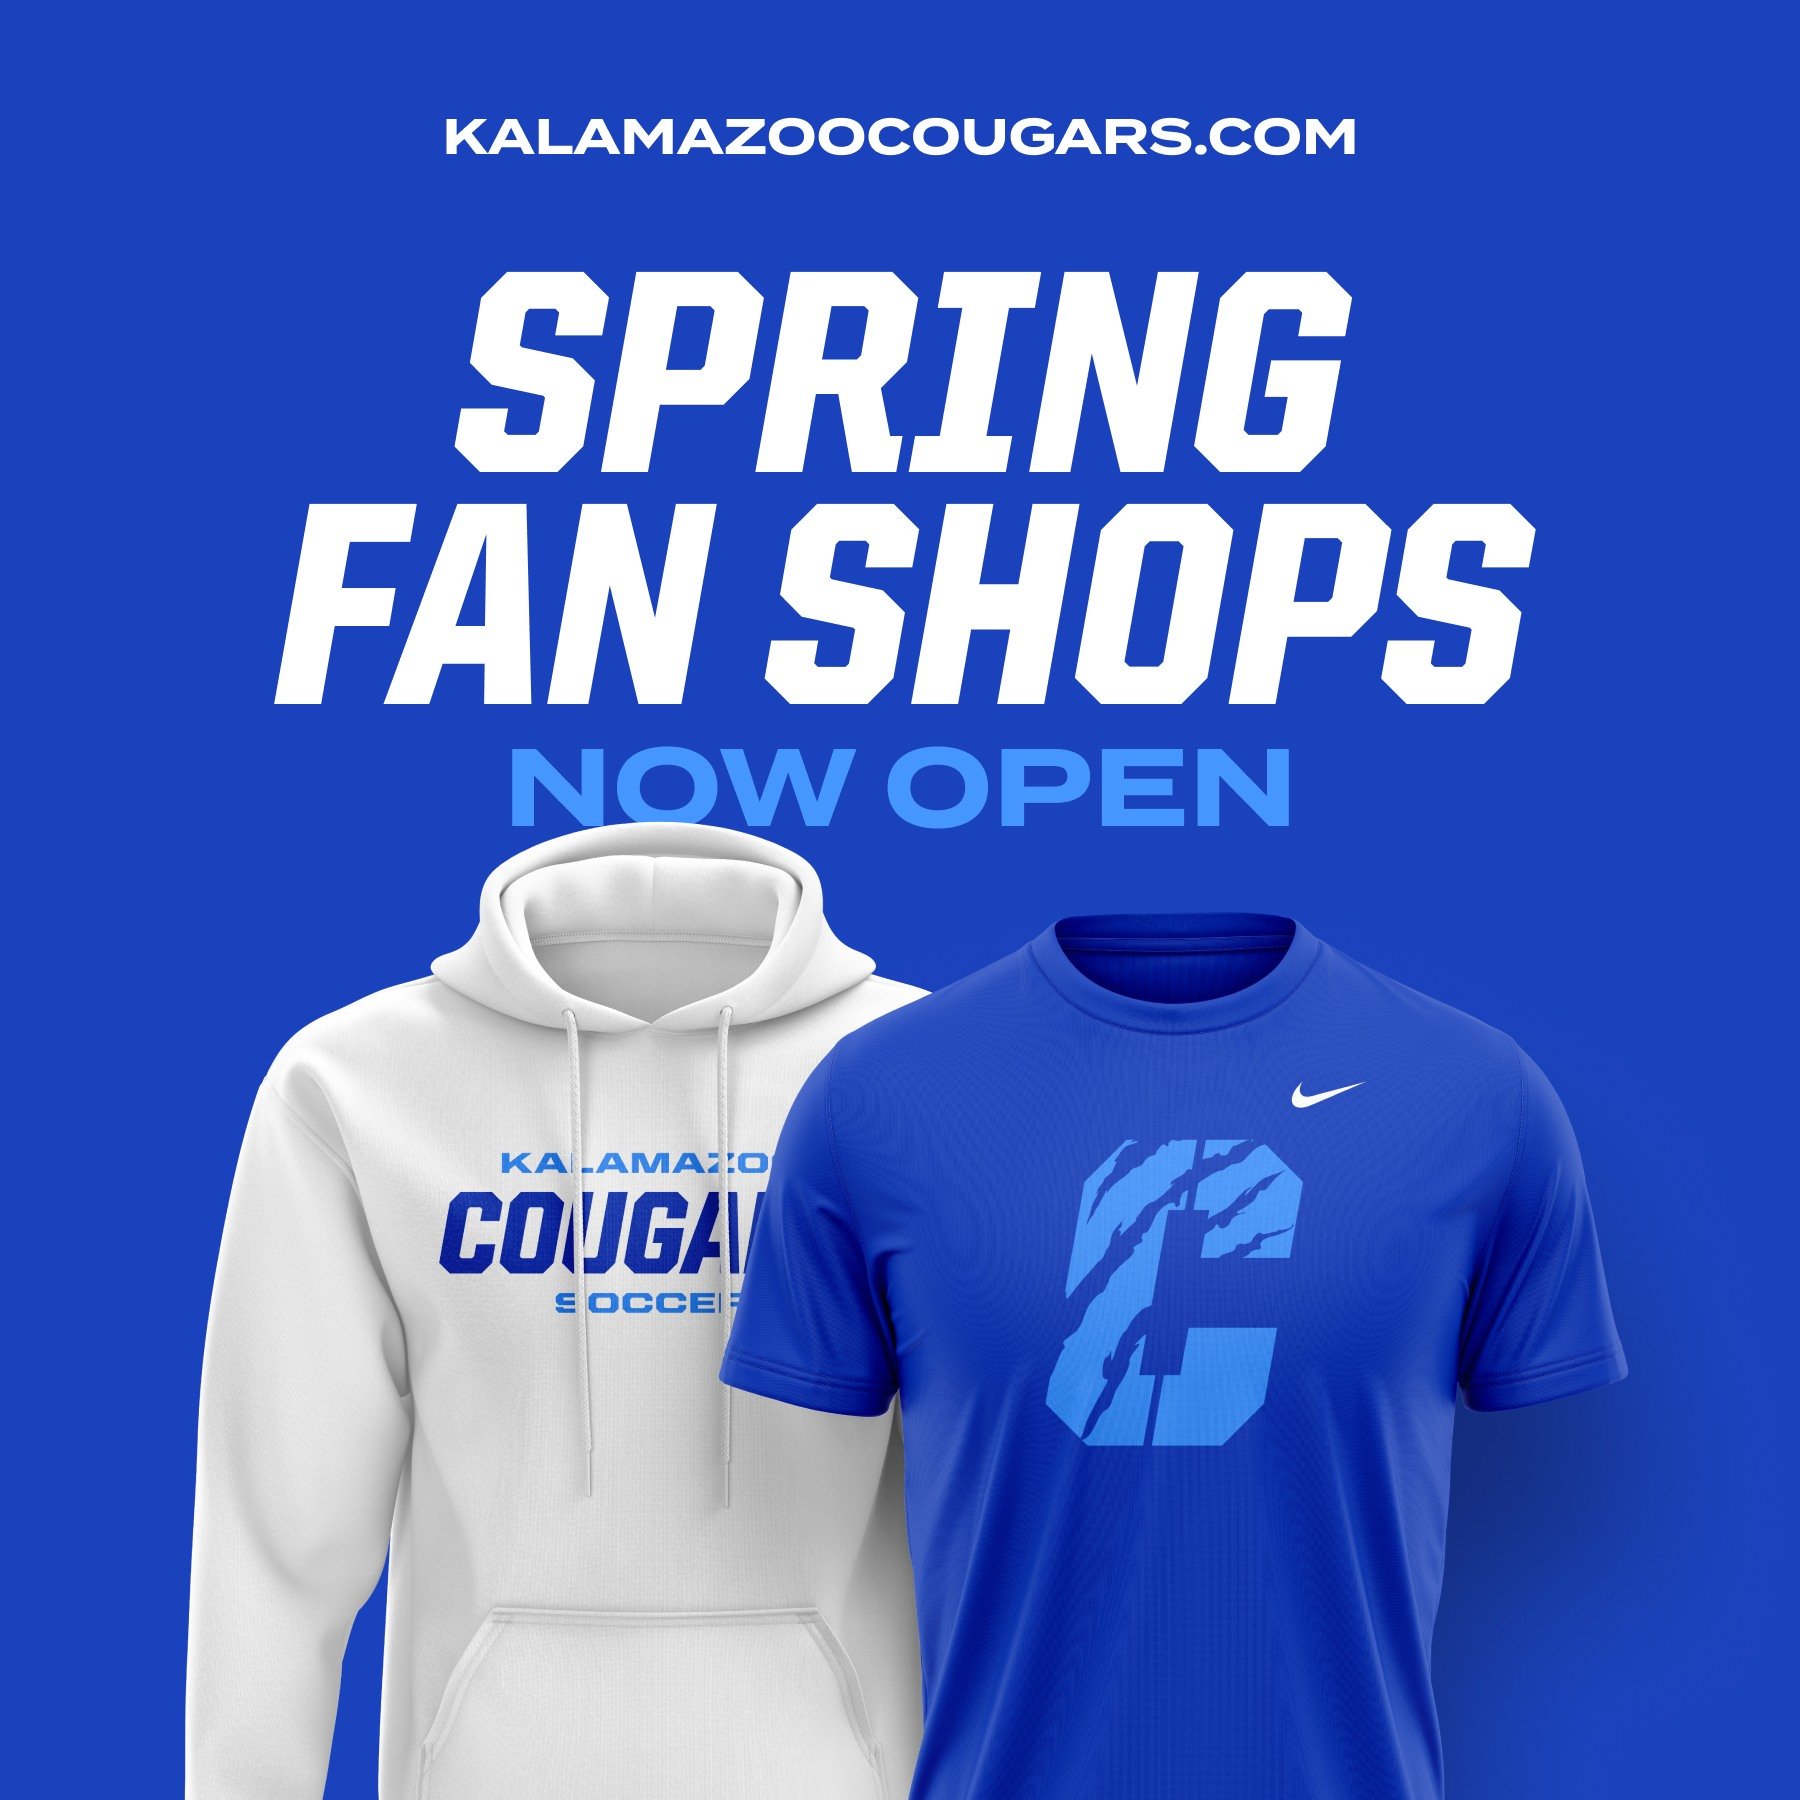 SPRING FAN SHOPS ARE NOW OPEN!

Visit http://kalamazoocougars.com/shop to start shopping.

We're also happy to share that all orders will be delivered to your doorstep! Your orders will be shipped out as they are fulfilled, giving you earlier deliver